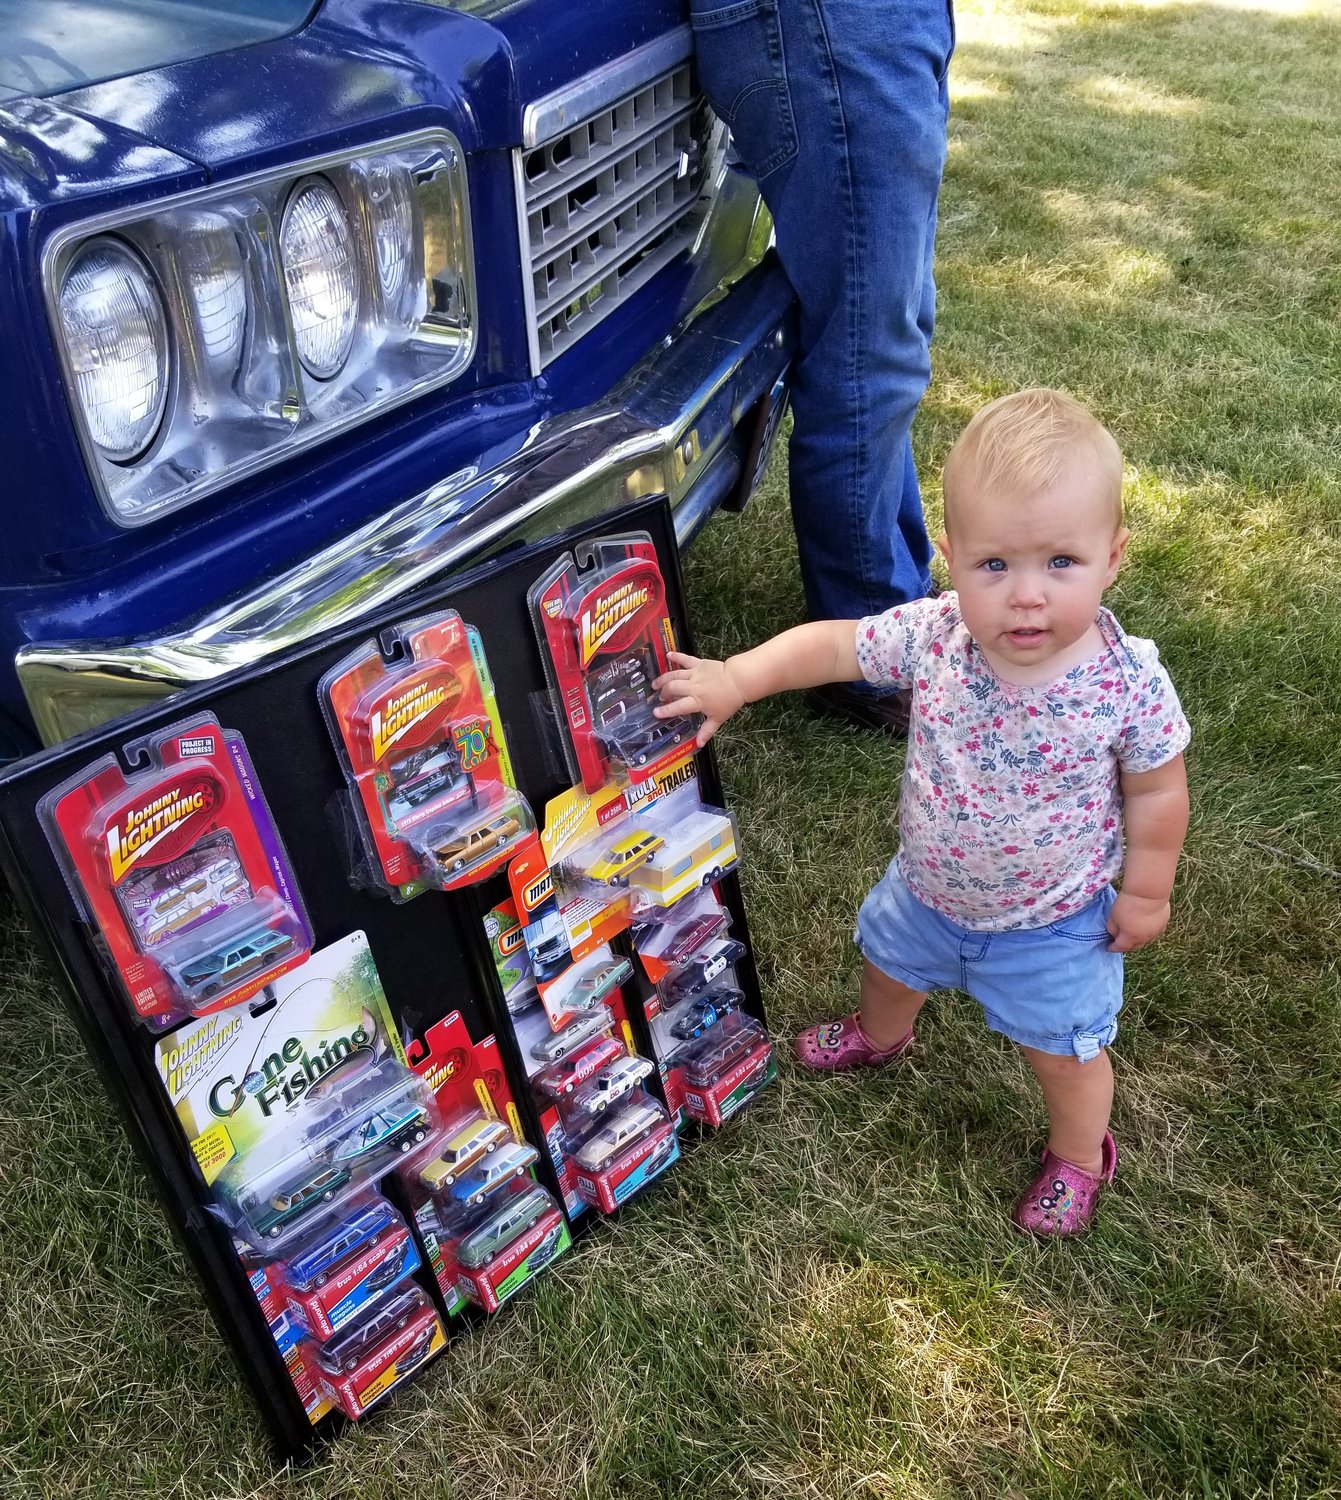 People of all ages enjoyed Clam-Fest including Elsie Roemhildt of Waseca shown here looking at some toy versions of the iconic station wagon.